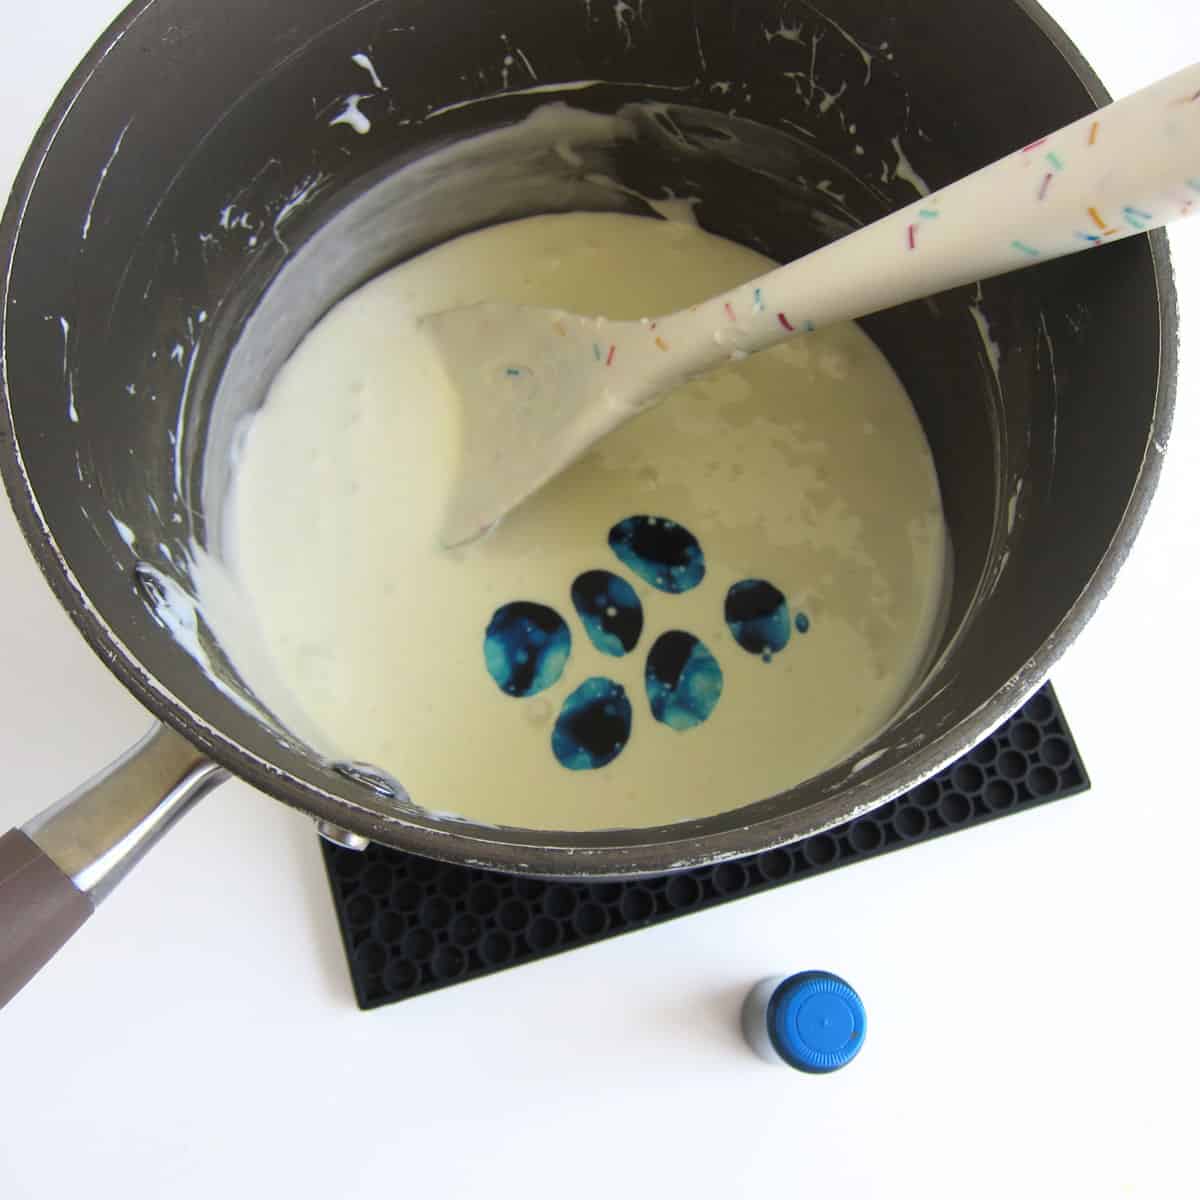 Drops of blue food coloring are added to the pan of melted butter and marshmallows.